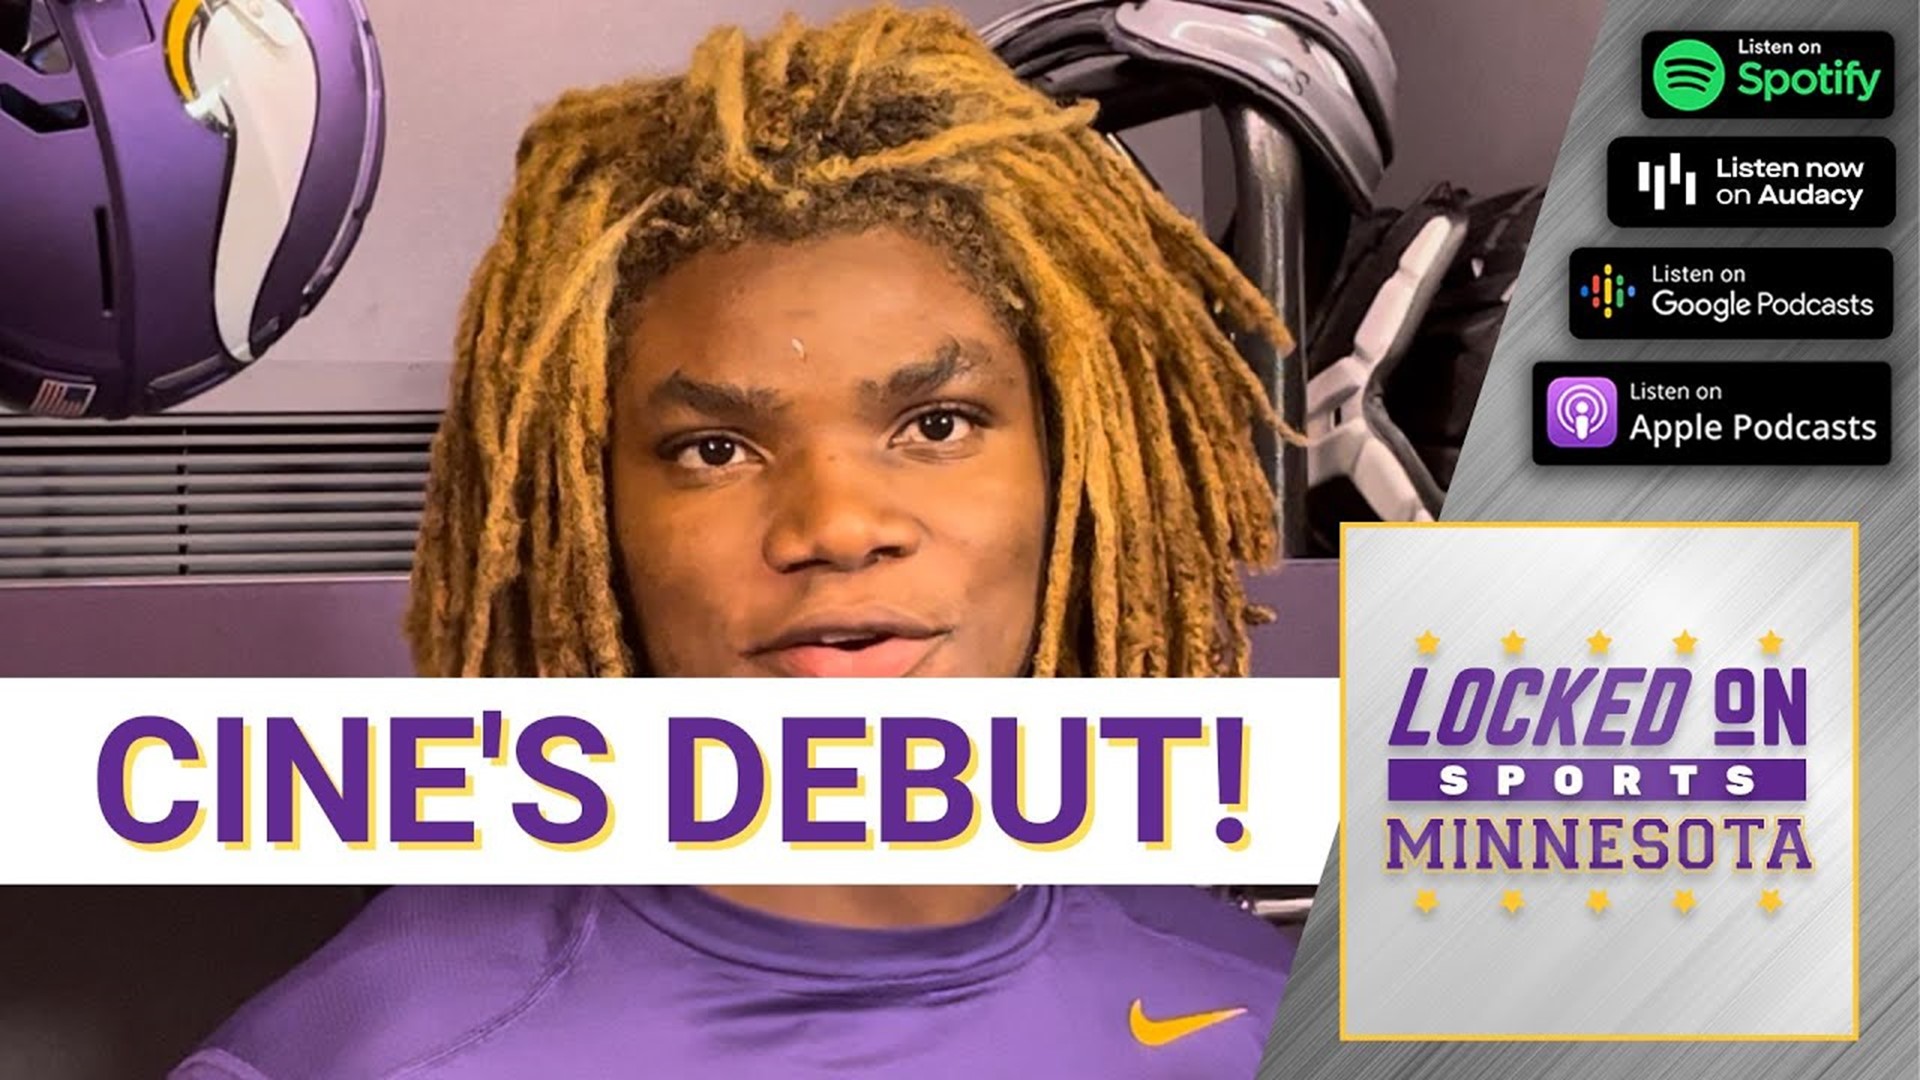 Minnesota Vikings first-round pick Lewis Cine is back from a knee injury and ready to debut against the Philadelphia Eagles on Monday Night Football.